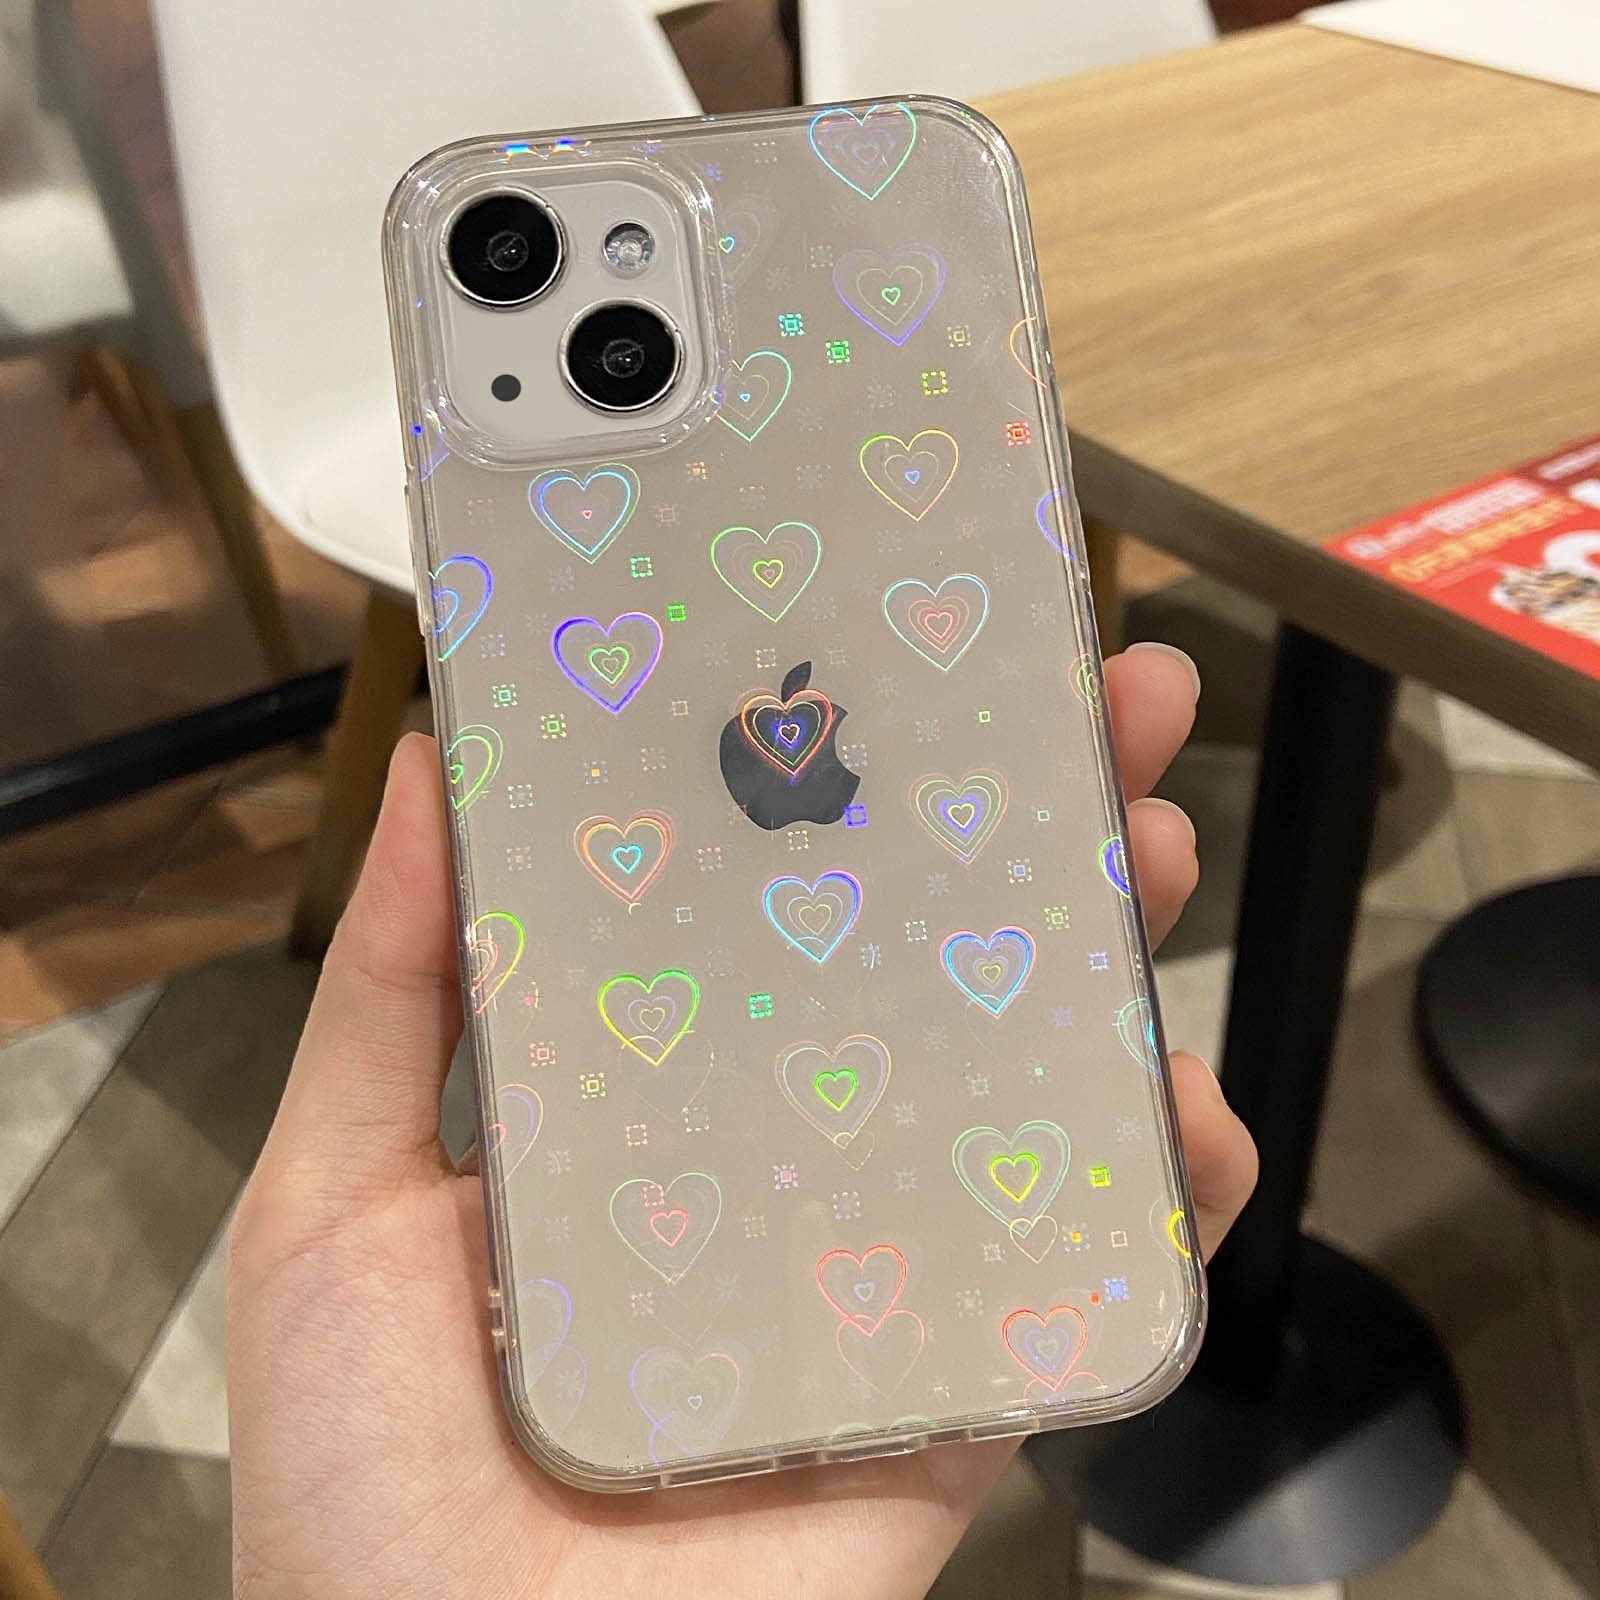 SmoBea Compatible with iPhone 13 Mini Case, for Laser Glitter Bling Heart Soft & Flexible TPU and Hard PC Back Shockproof Cover Women Girls Heart Pattern Phone Case (Rainbow Heart/Clear)